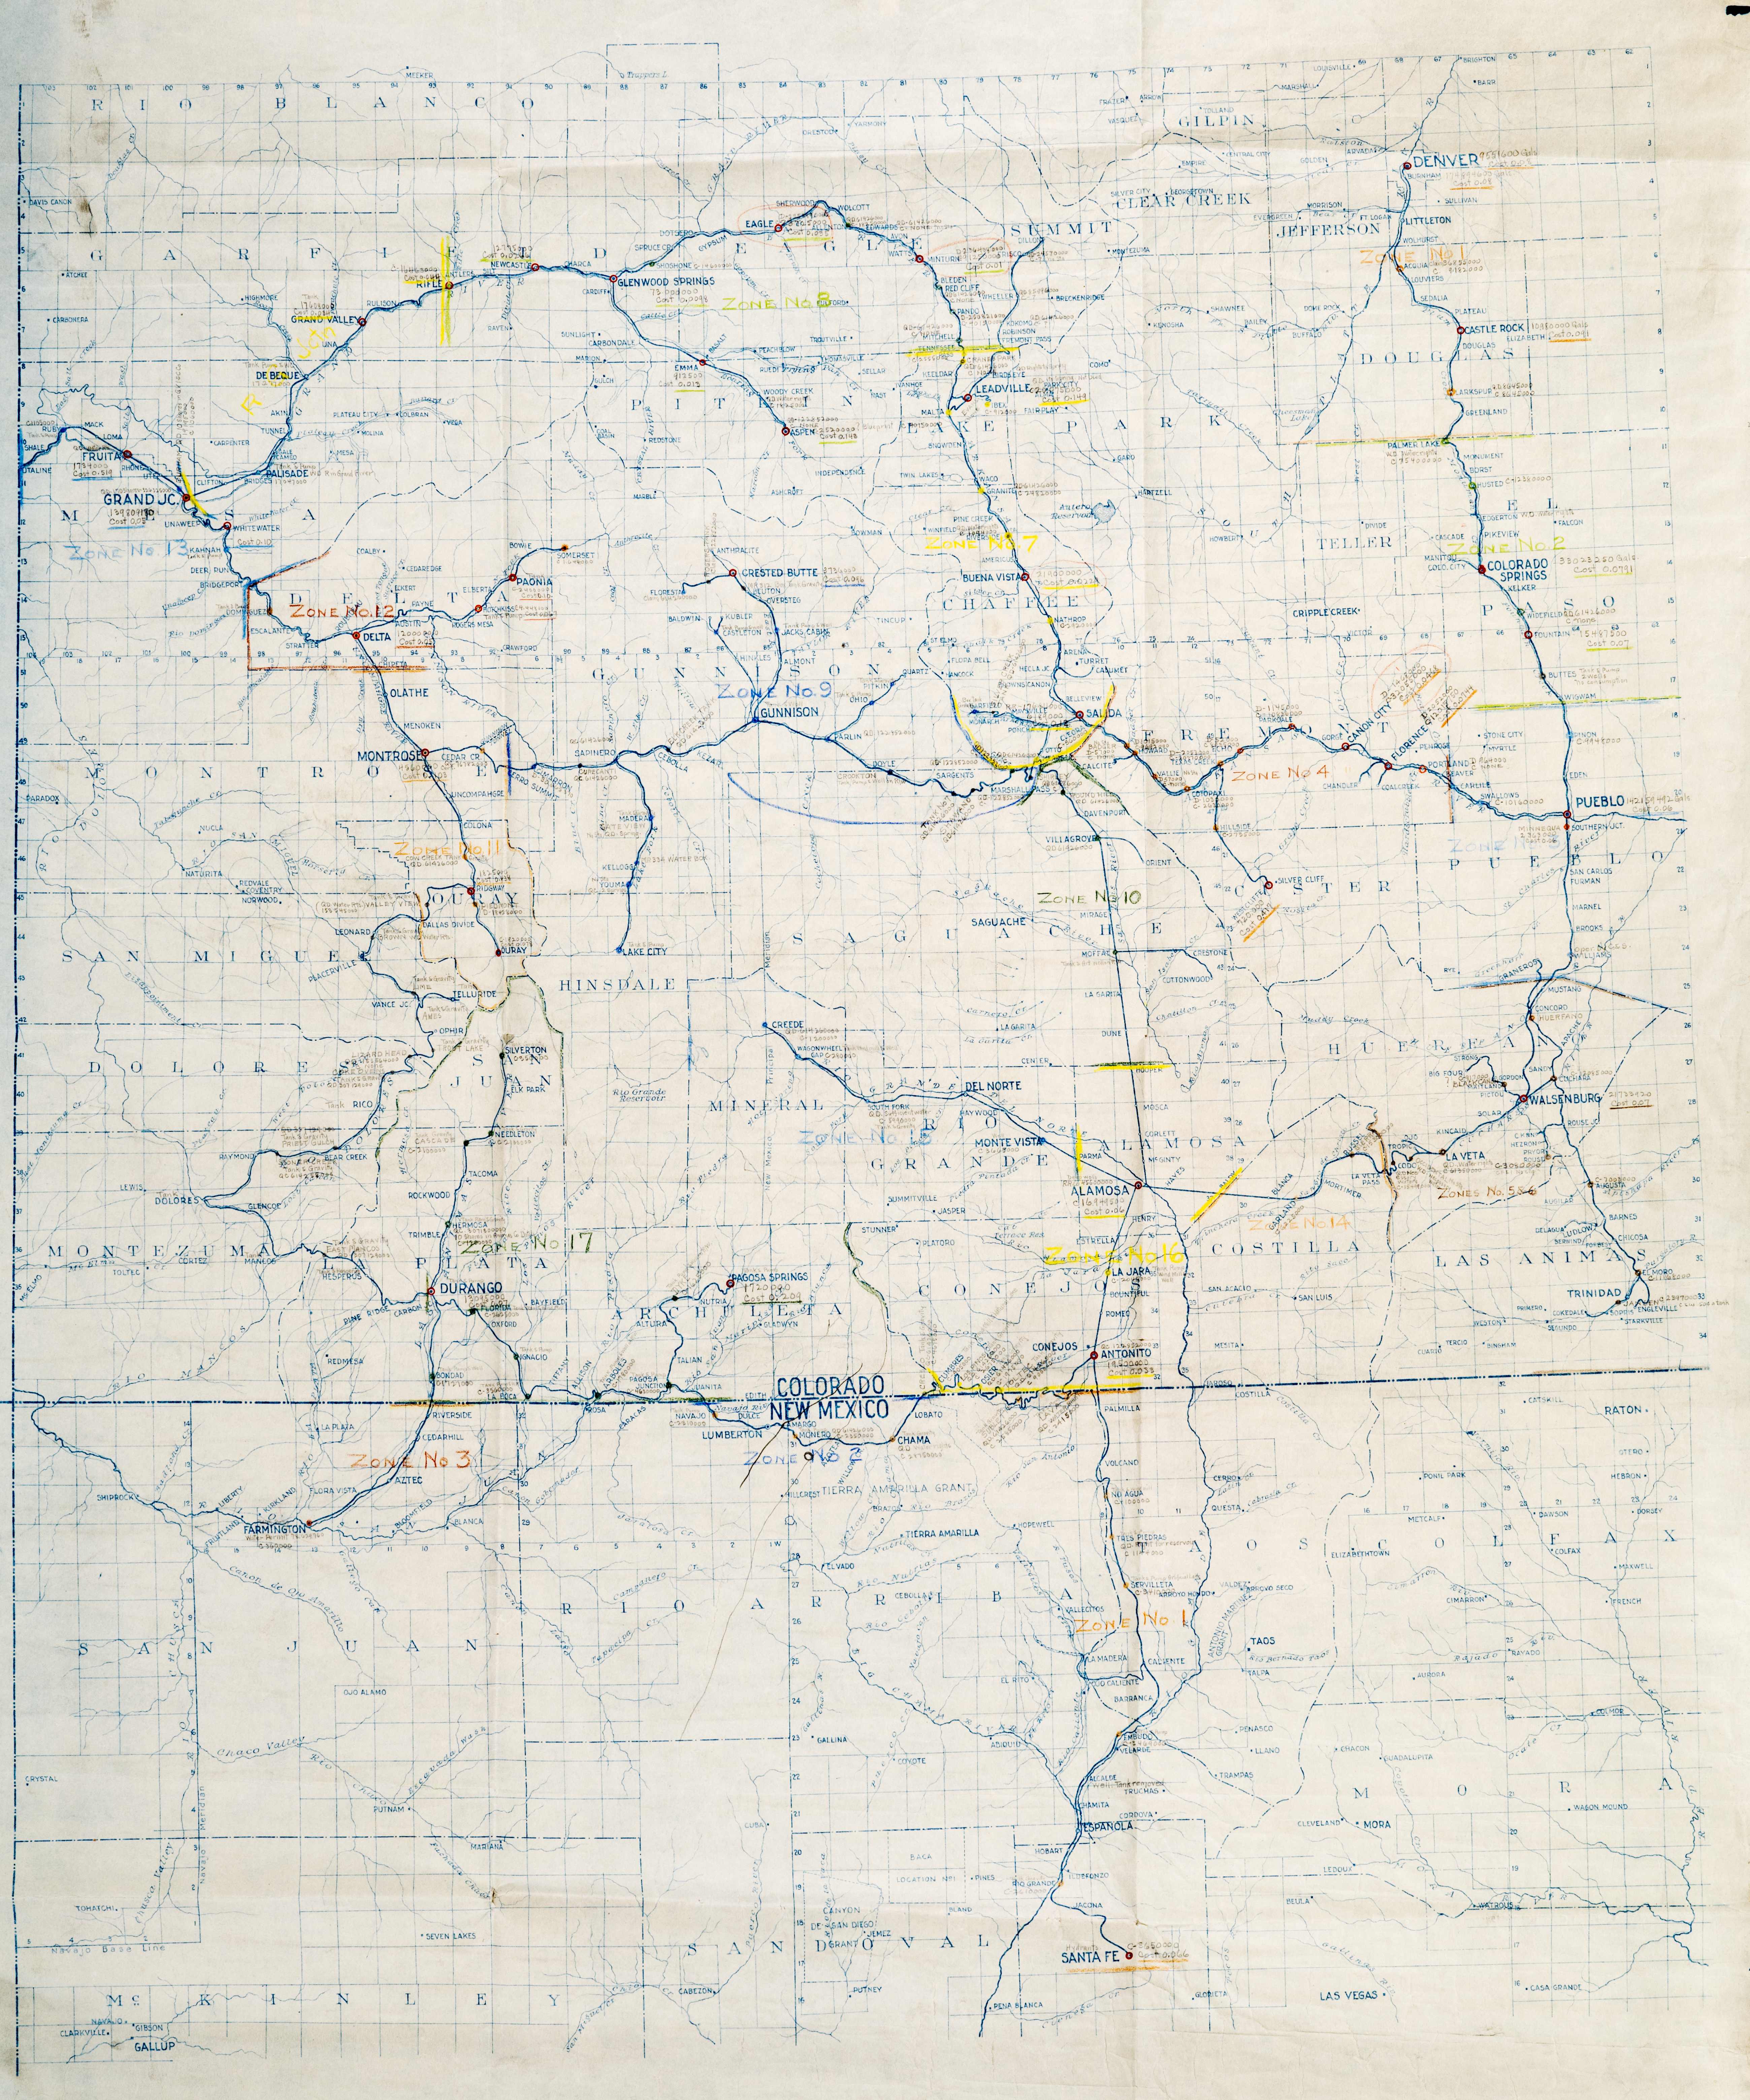 Green20-D-Folder 2-12_D&amp;RGW map of water replenishment facilities system-wide, ~1925_47.jpg